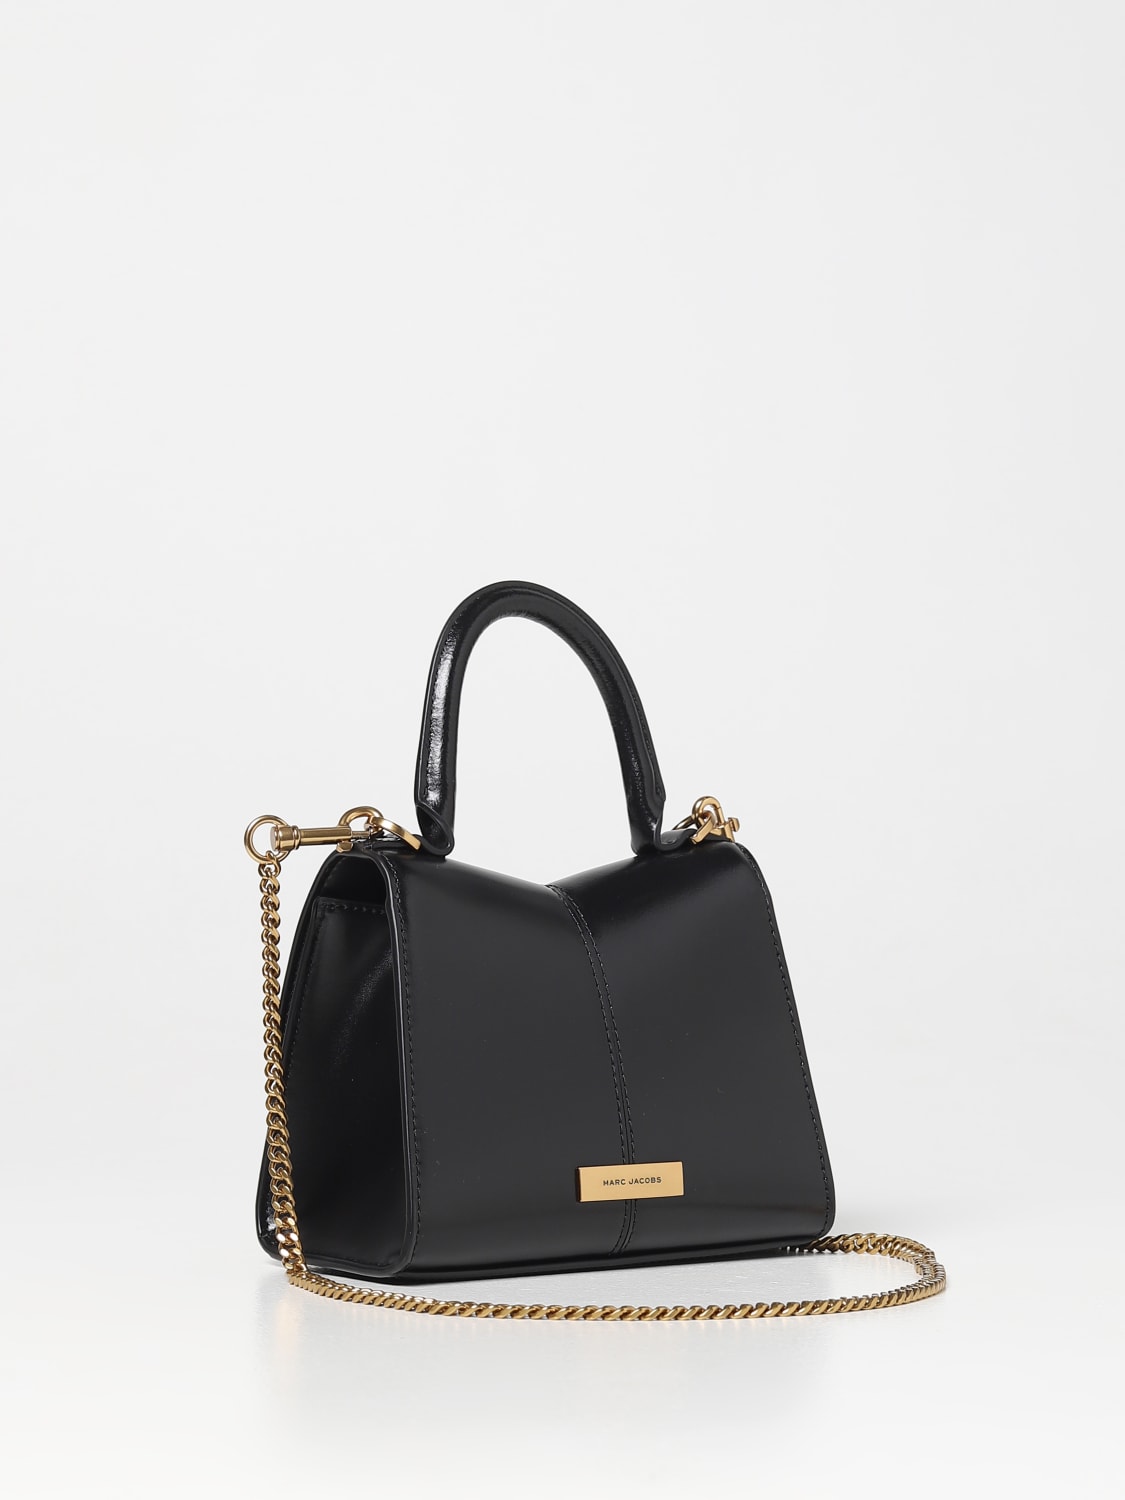 marc jacobs all black